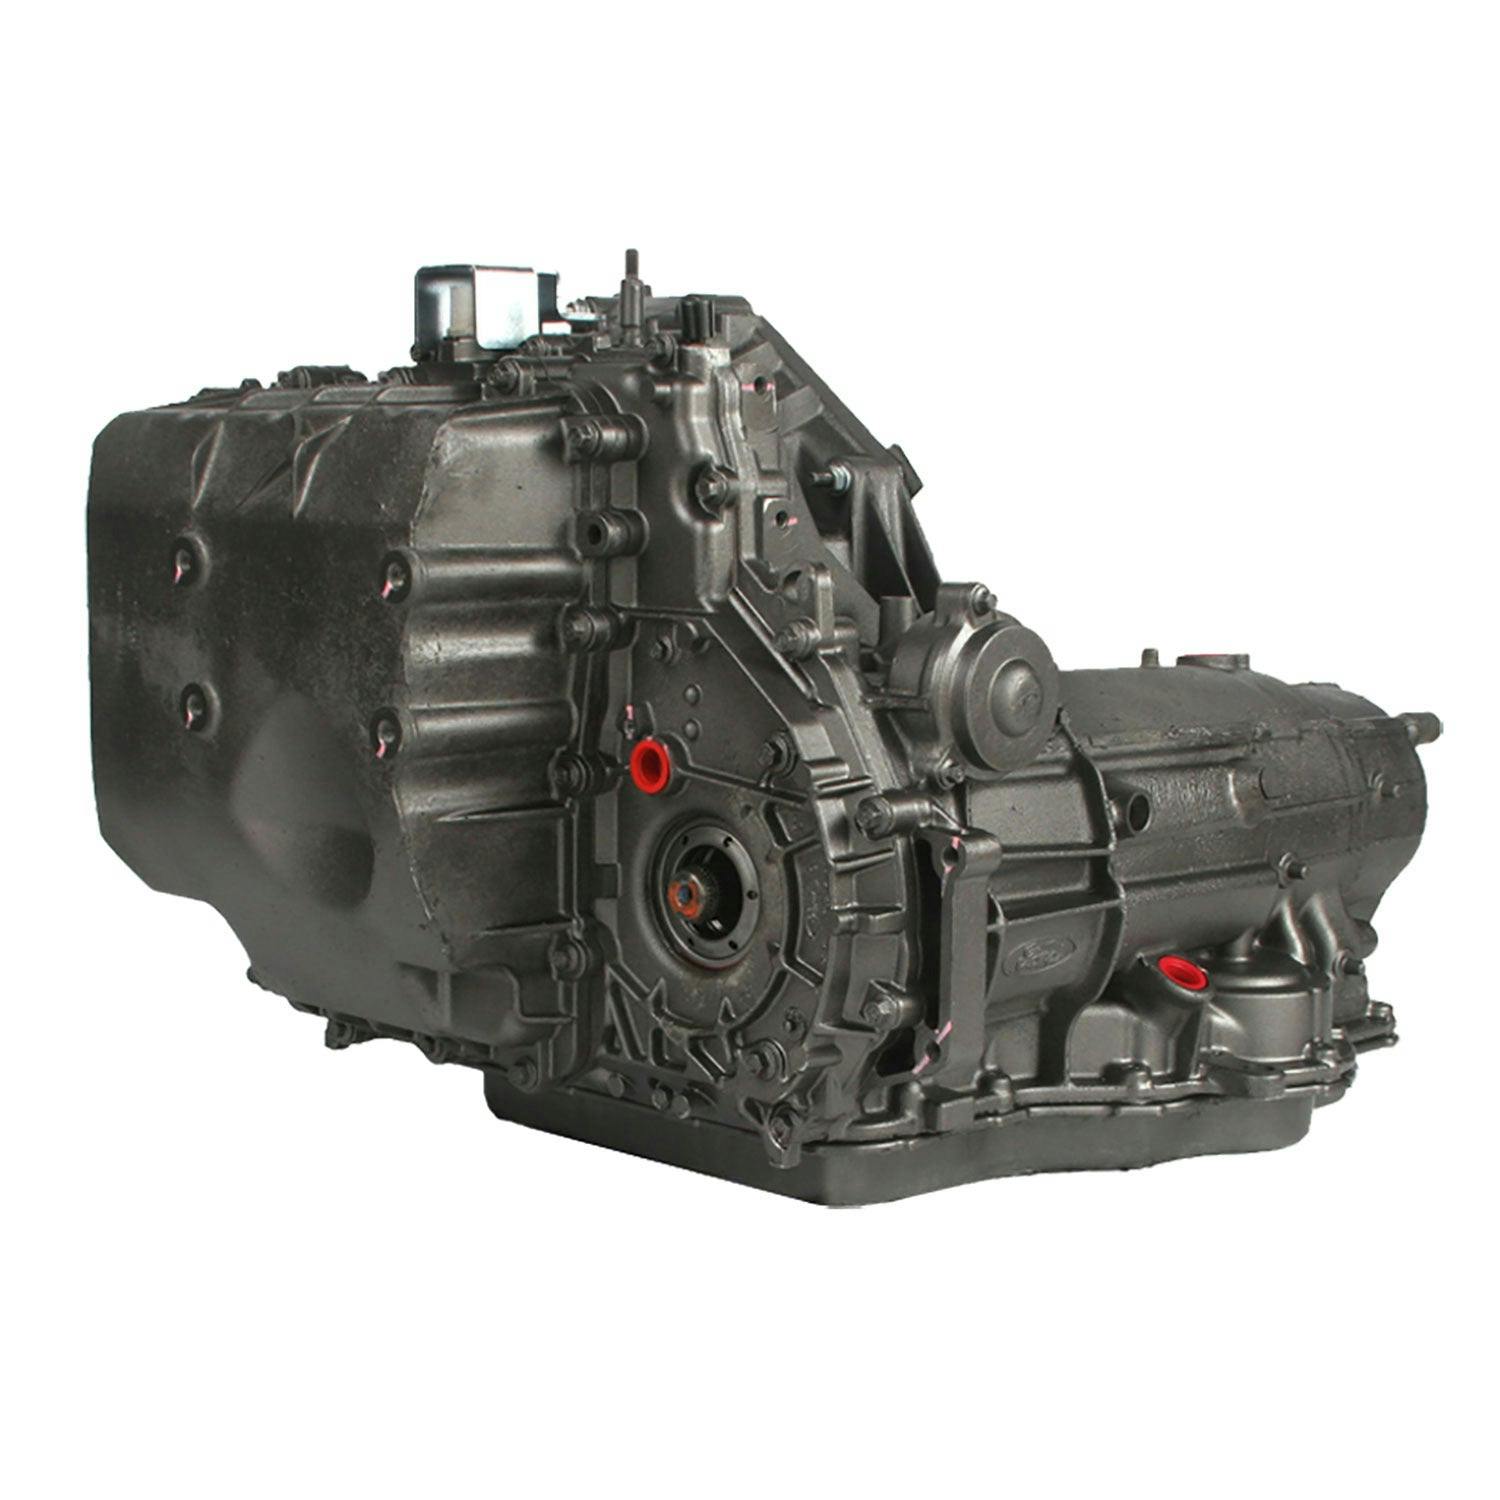 Automatic Transmission for 2001-2003 Ford Taurus/Mercury Sable FWD with 3L V6 Engine